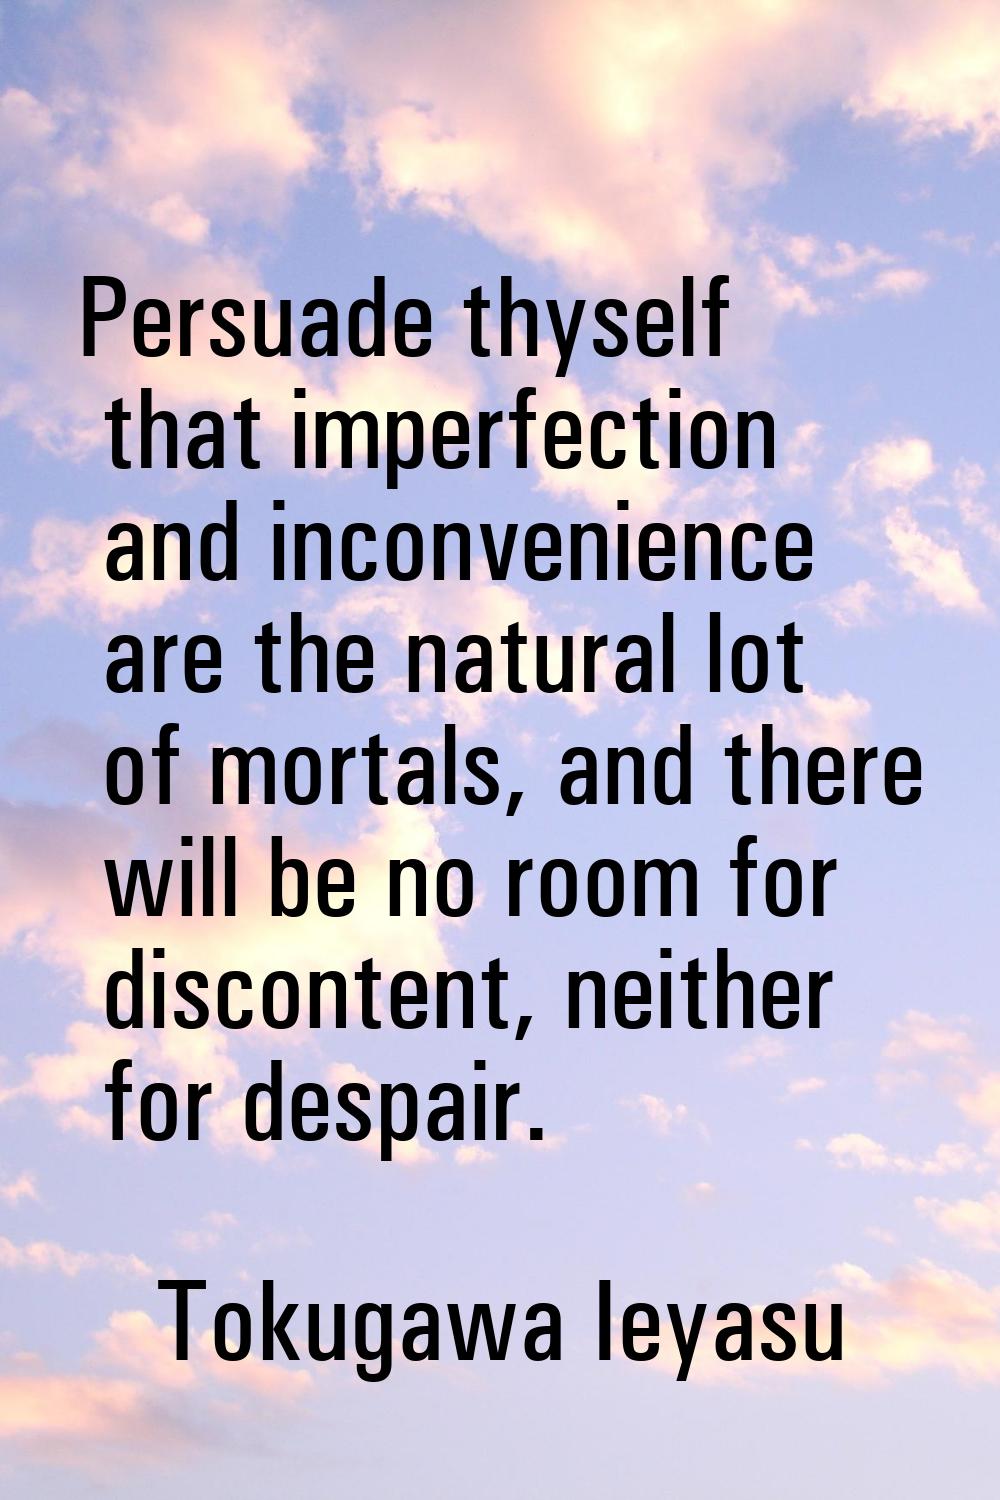 Persuade thyself that imperfection and inconvenience are the natural lot of mortals, and there will